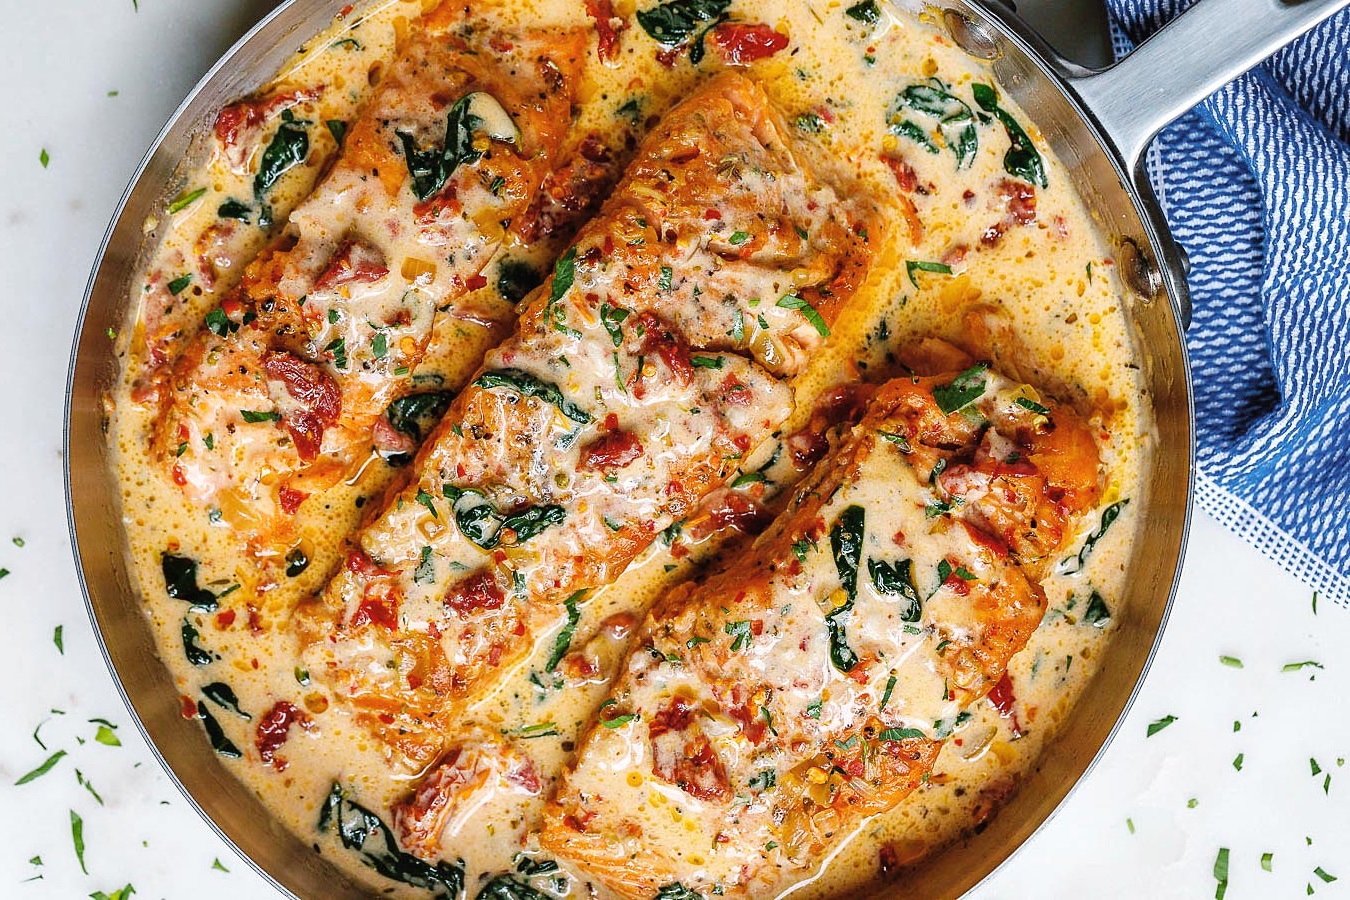 Creamy Tuscan Salmon with Spinach and Sun-Dried Tomatoes